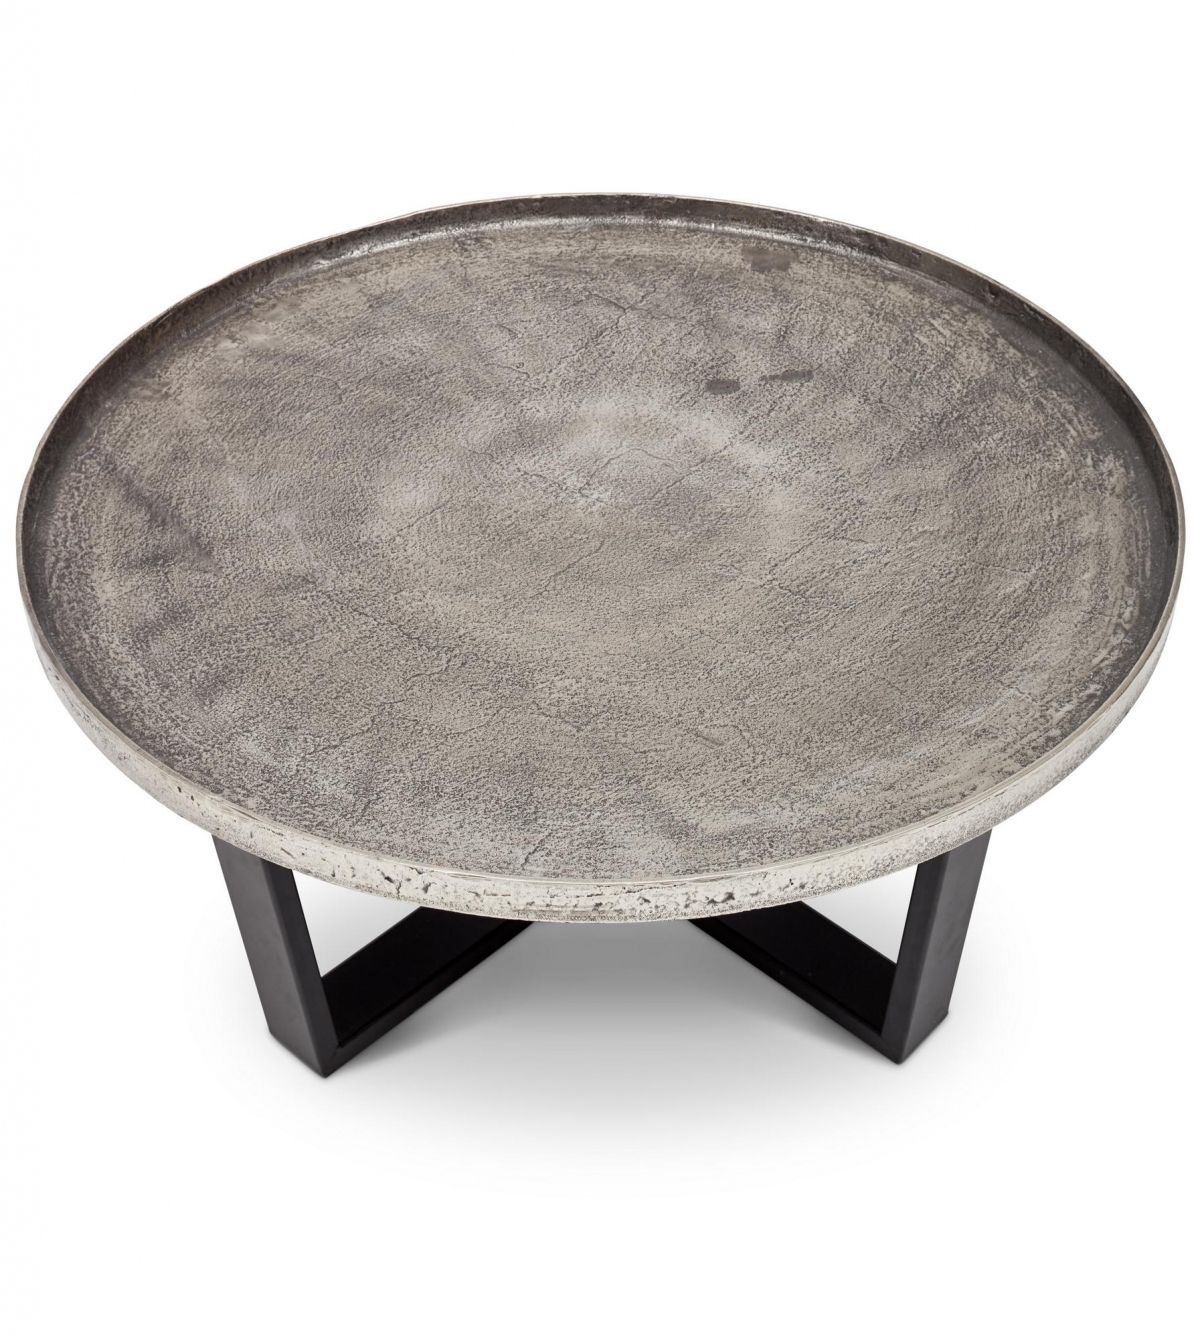 Zara Coffee Table In Vintage Silver Within Antique Silver Metal Coffee Tables (View 9 of 15)